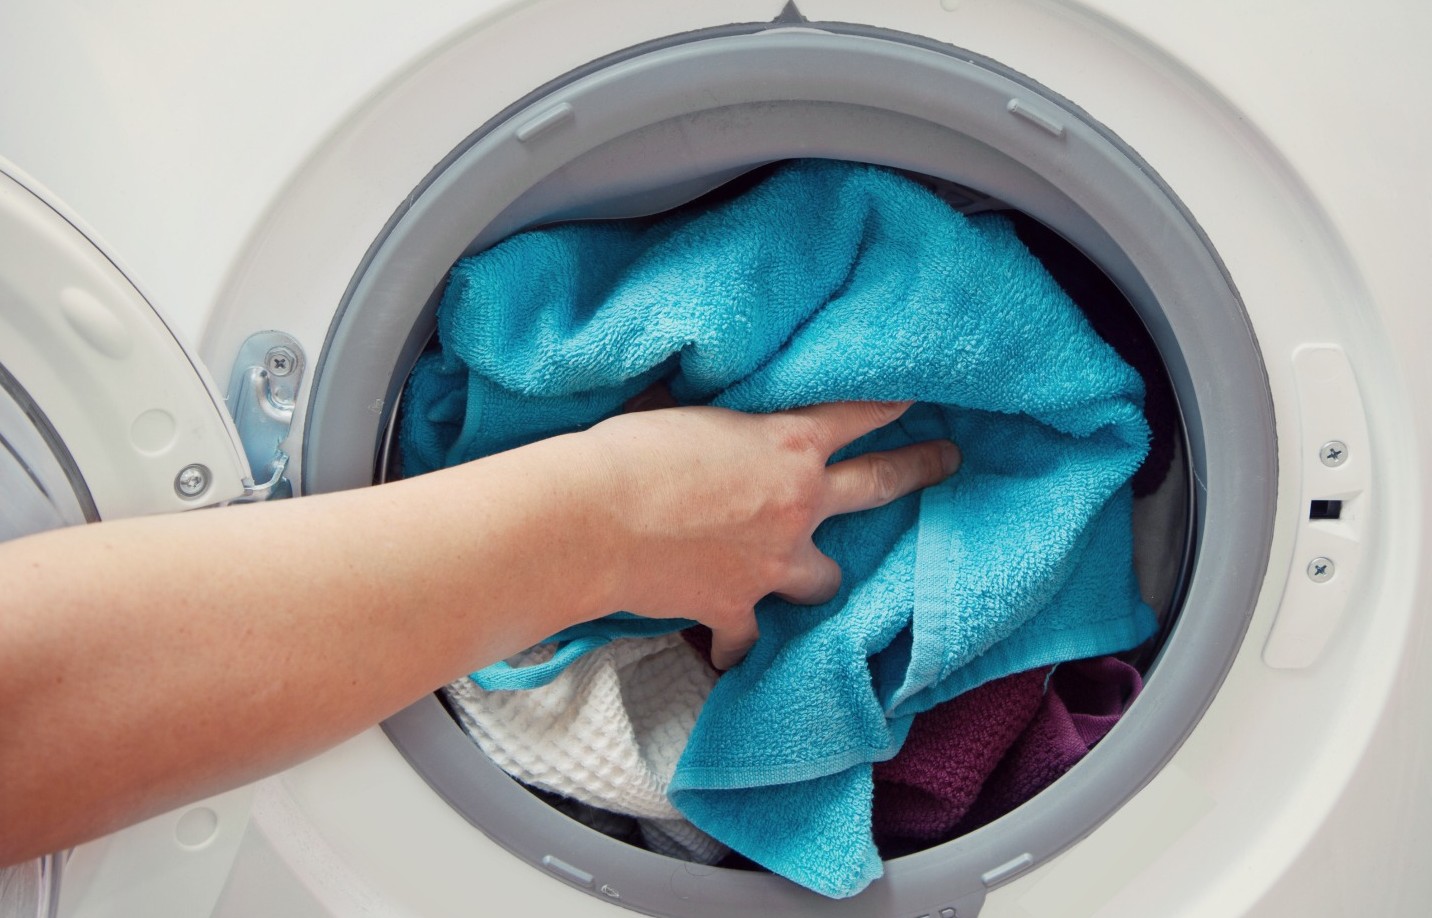 Washing Colored Clothes In Hot Water : Practical Guide to Doing Laundry While Traveling - All You ... / Hot water also encourages colors to run and fade, so you'll want to avoid hot water washes with any sort of colored garments.